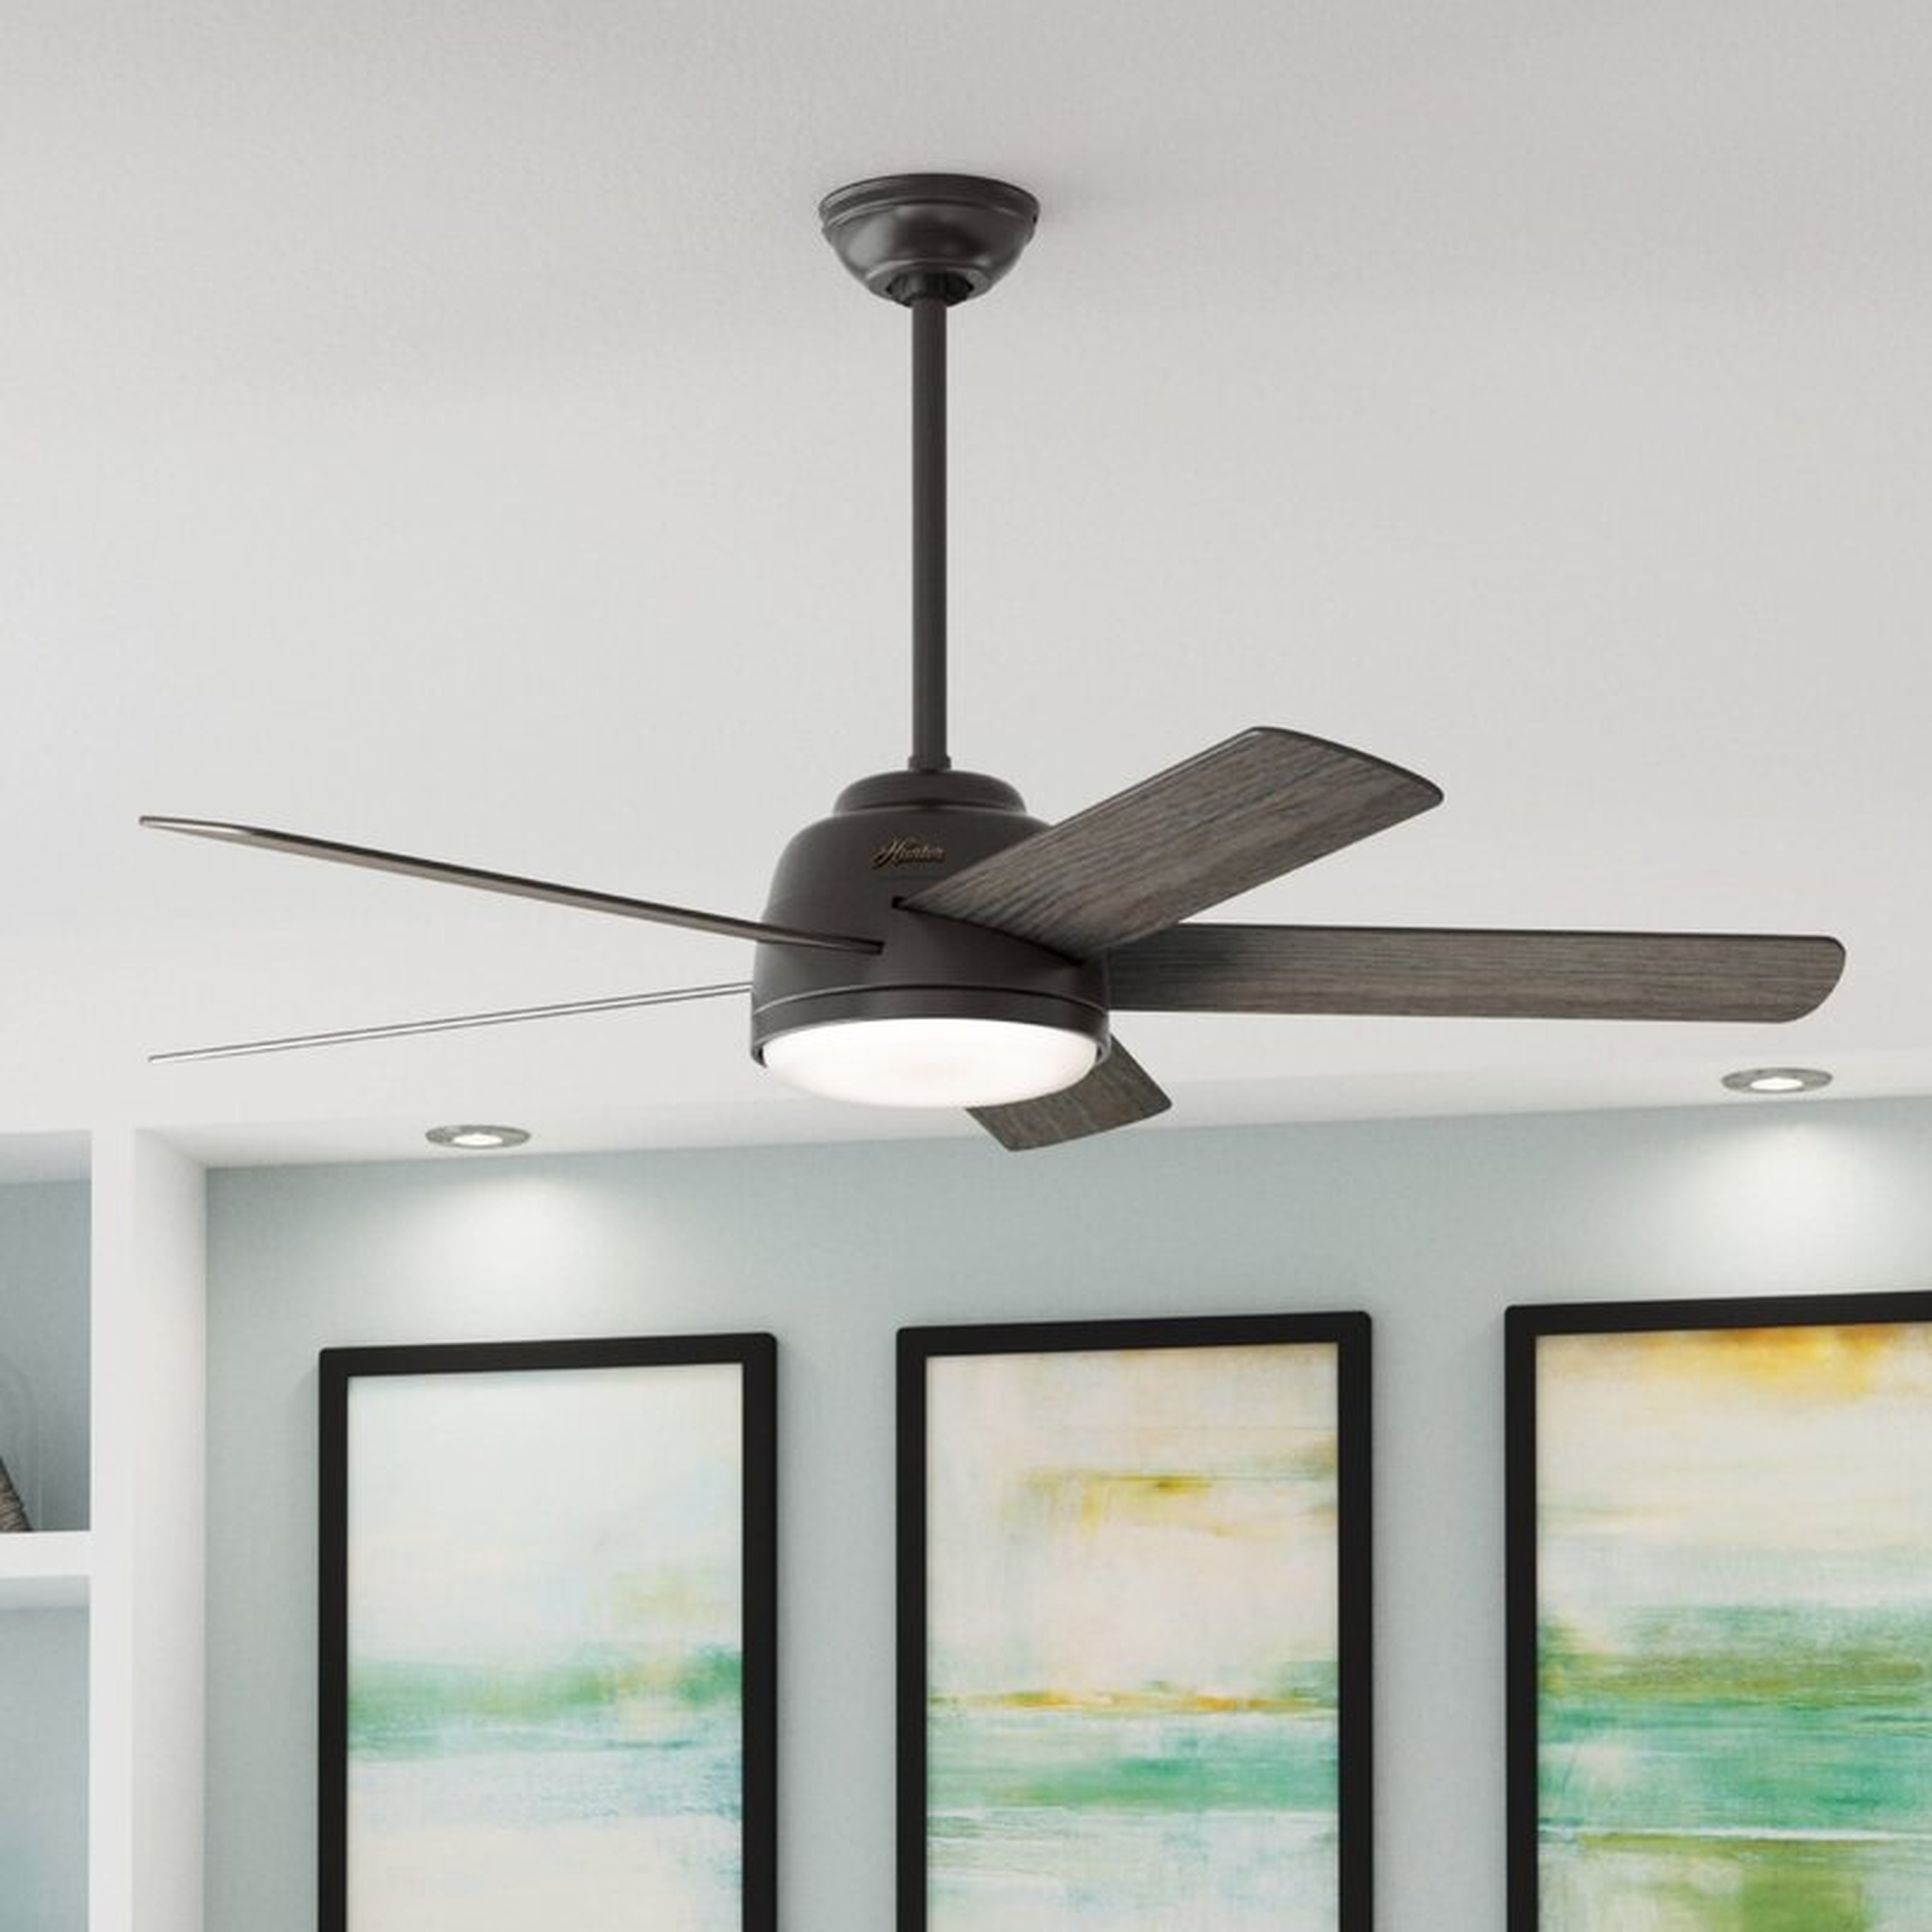 54'' Romulus 5 - Blade LED Smart Standard Ceiling Fan with Remote Control and Light Kit Included - Wayfair